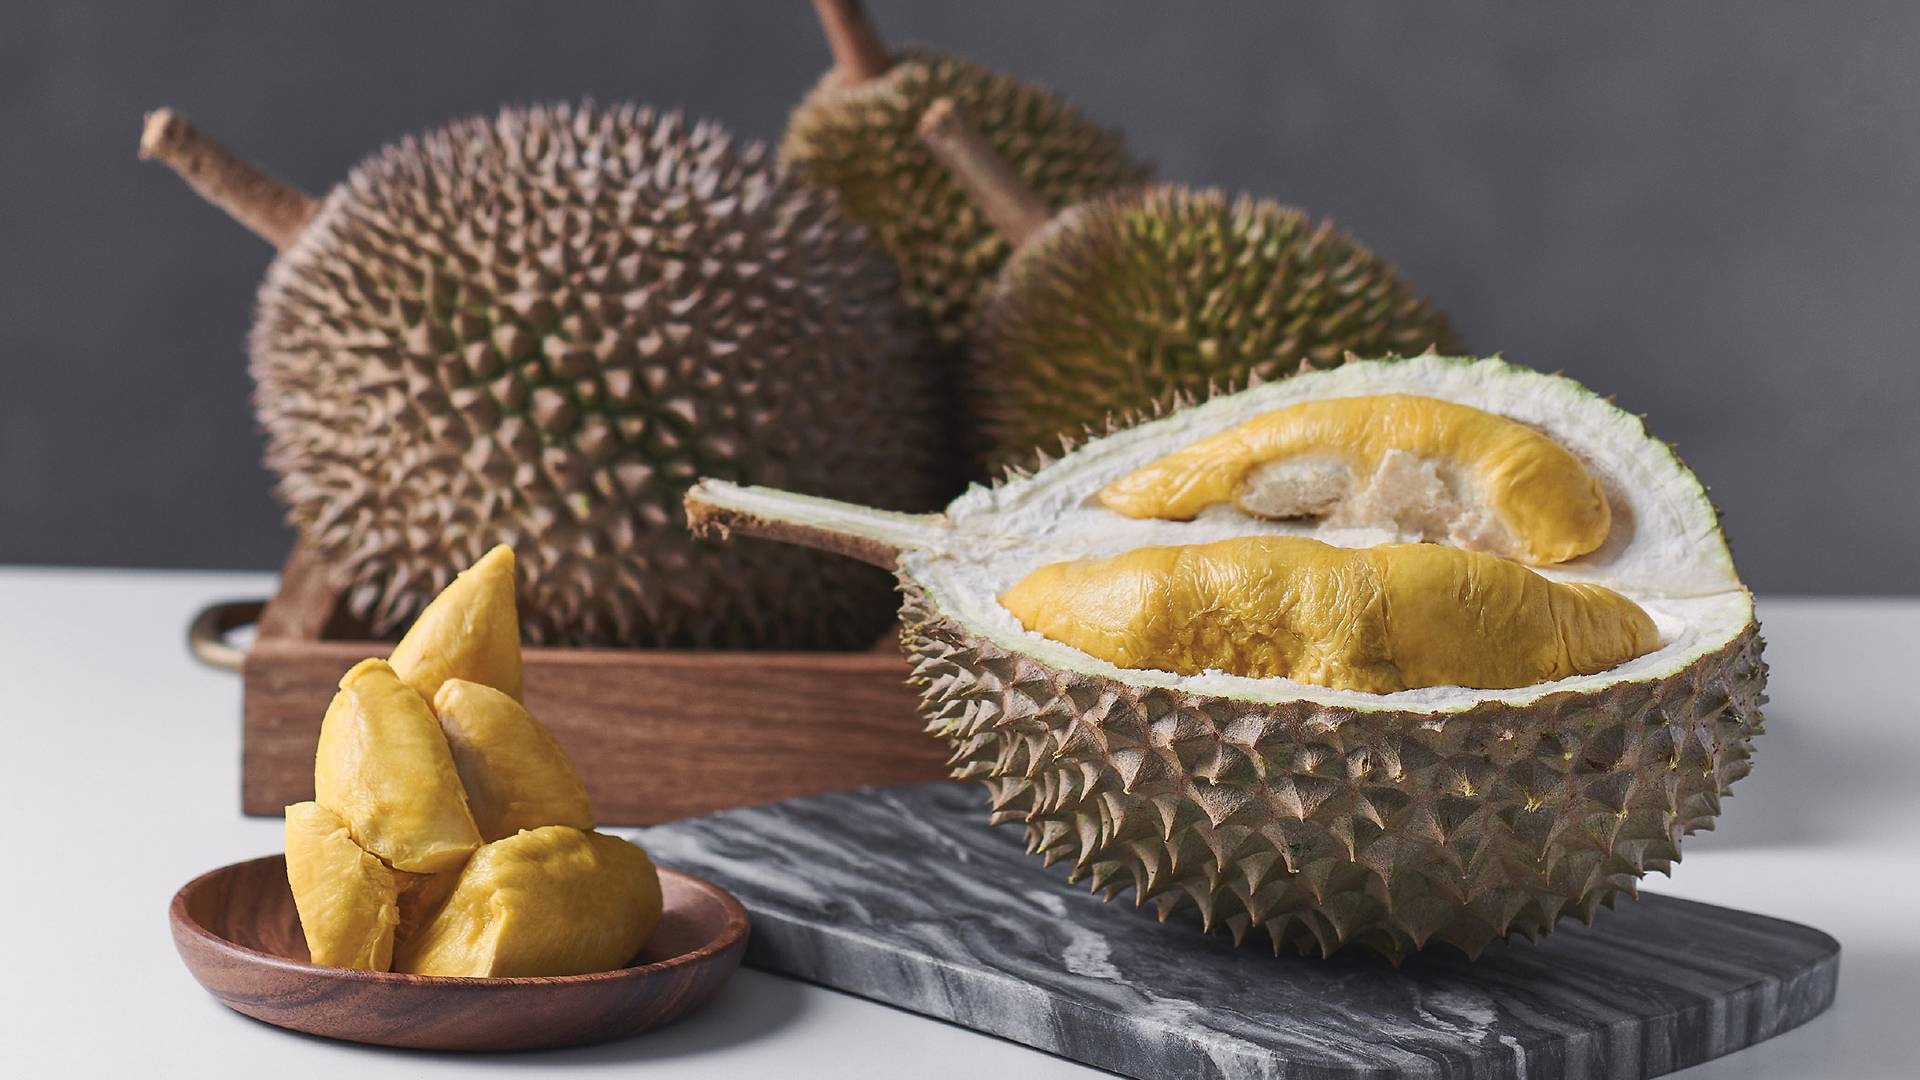 Durian: A highly sought-after fruit in Asian markets, Natural foods. 1920x1080 Full HD Wallpaper.